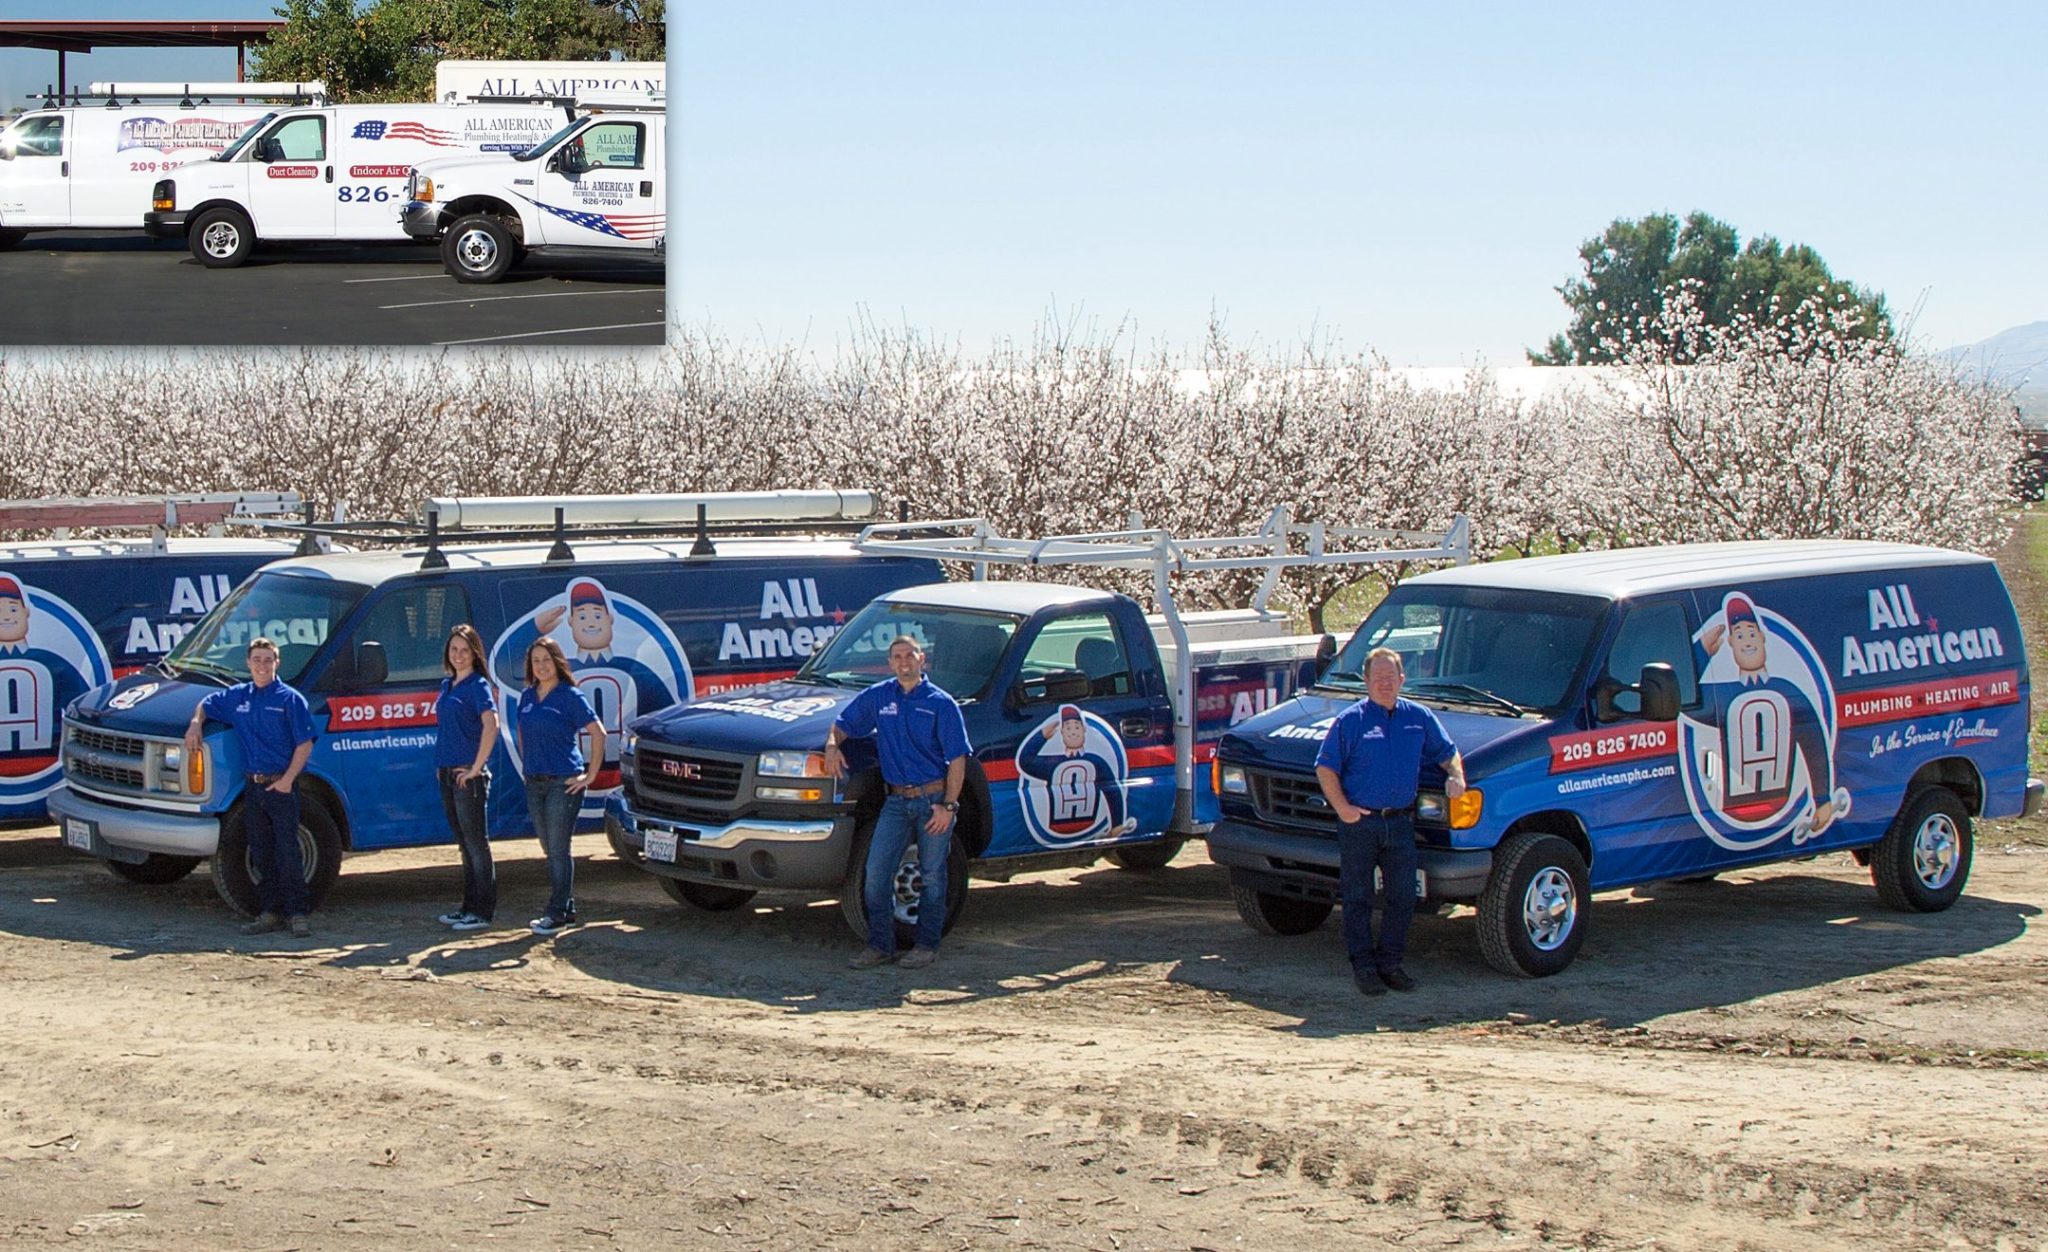 Before & after retro-themed fleet branding integrated on a wrap design for this California heating and air contractor.